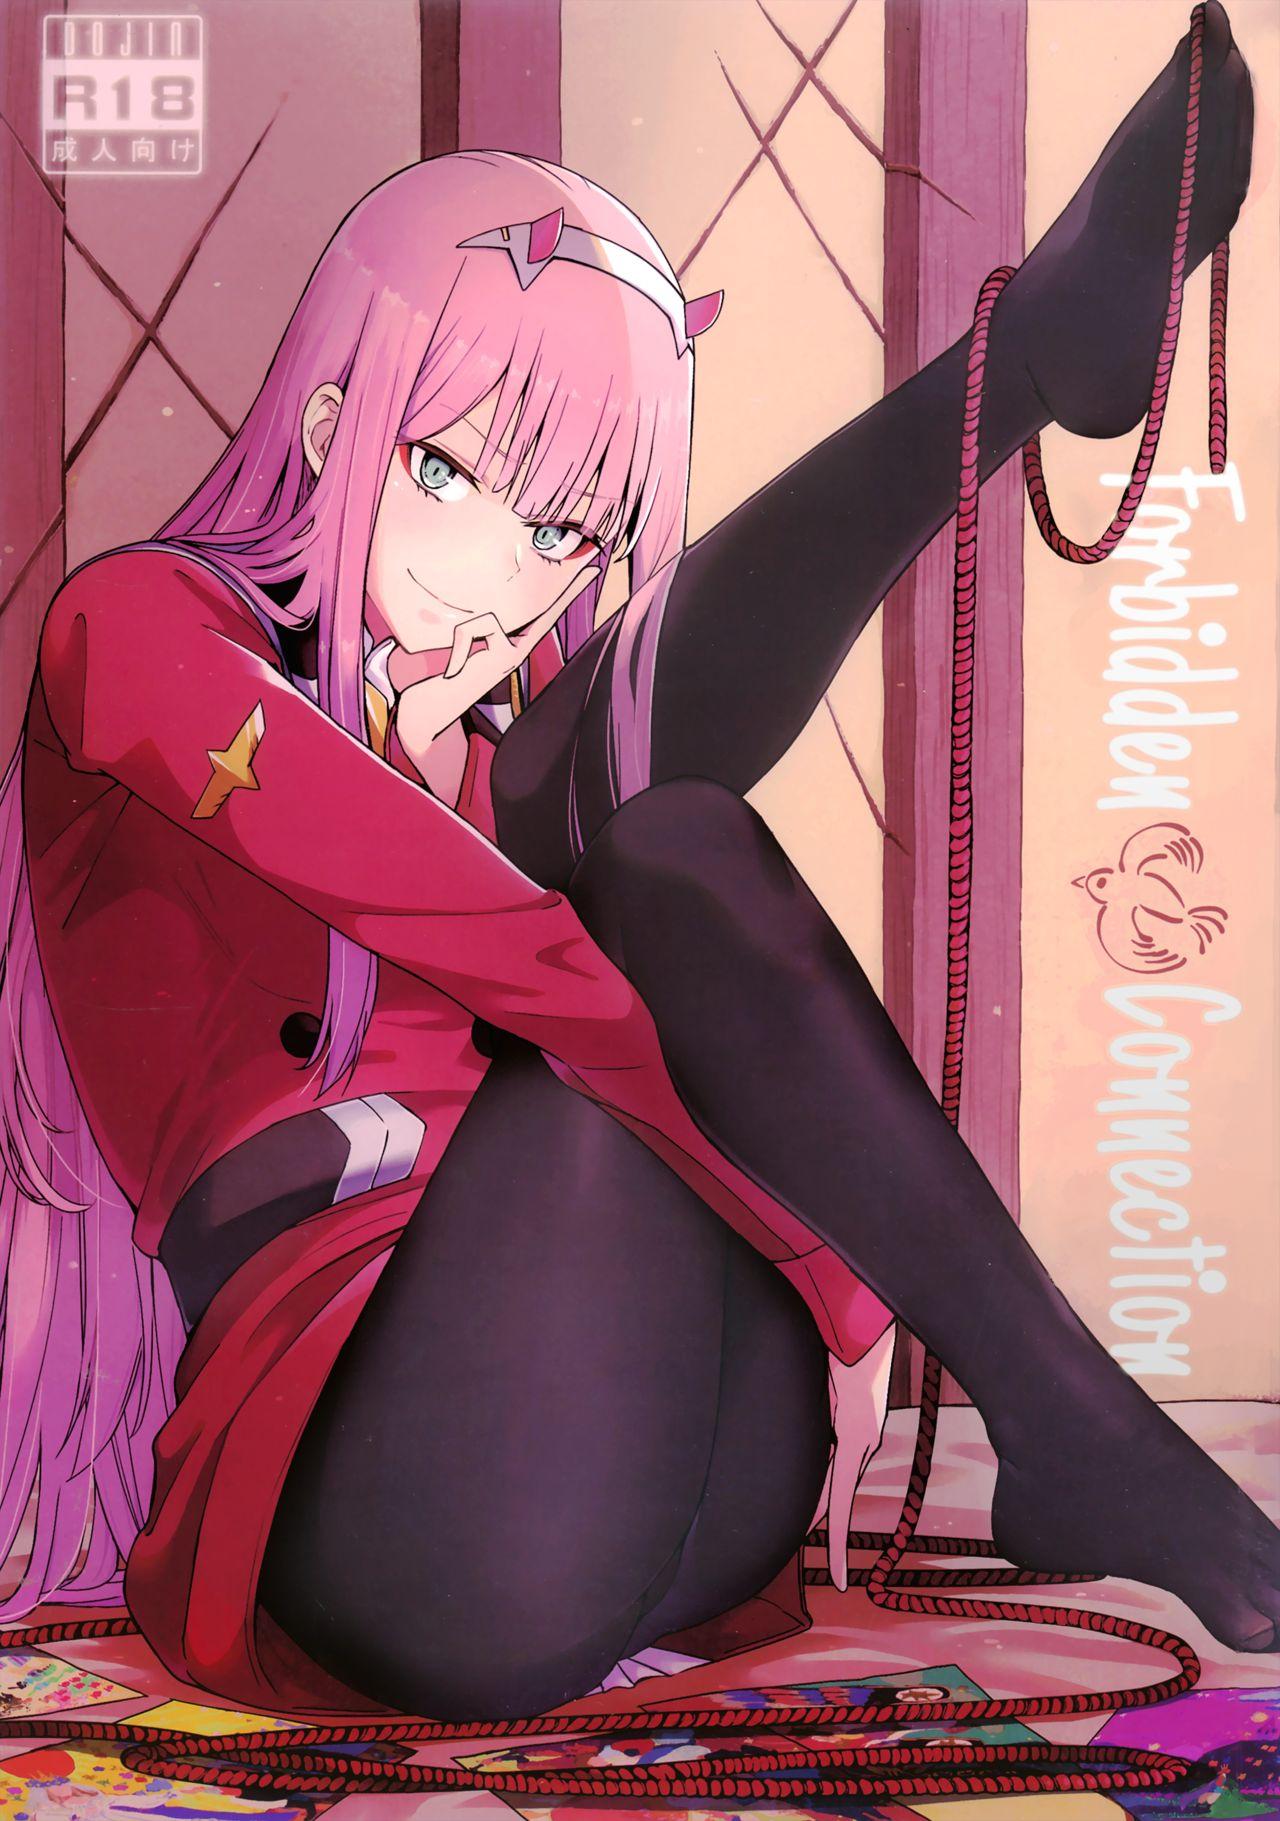 Morocha Forbidden Connection - Darling in the franxx Body Massage - Picture 1